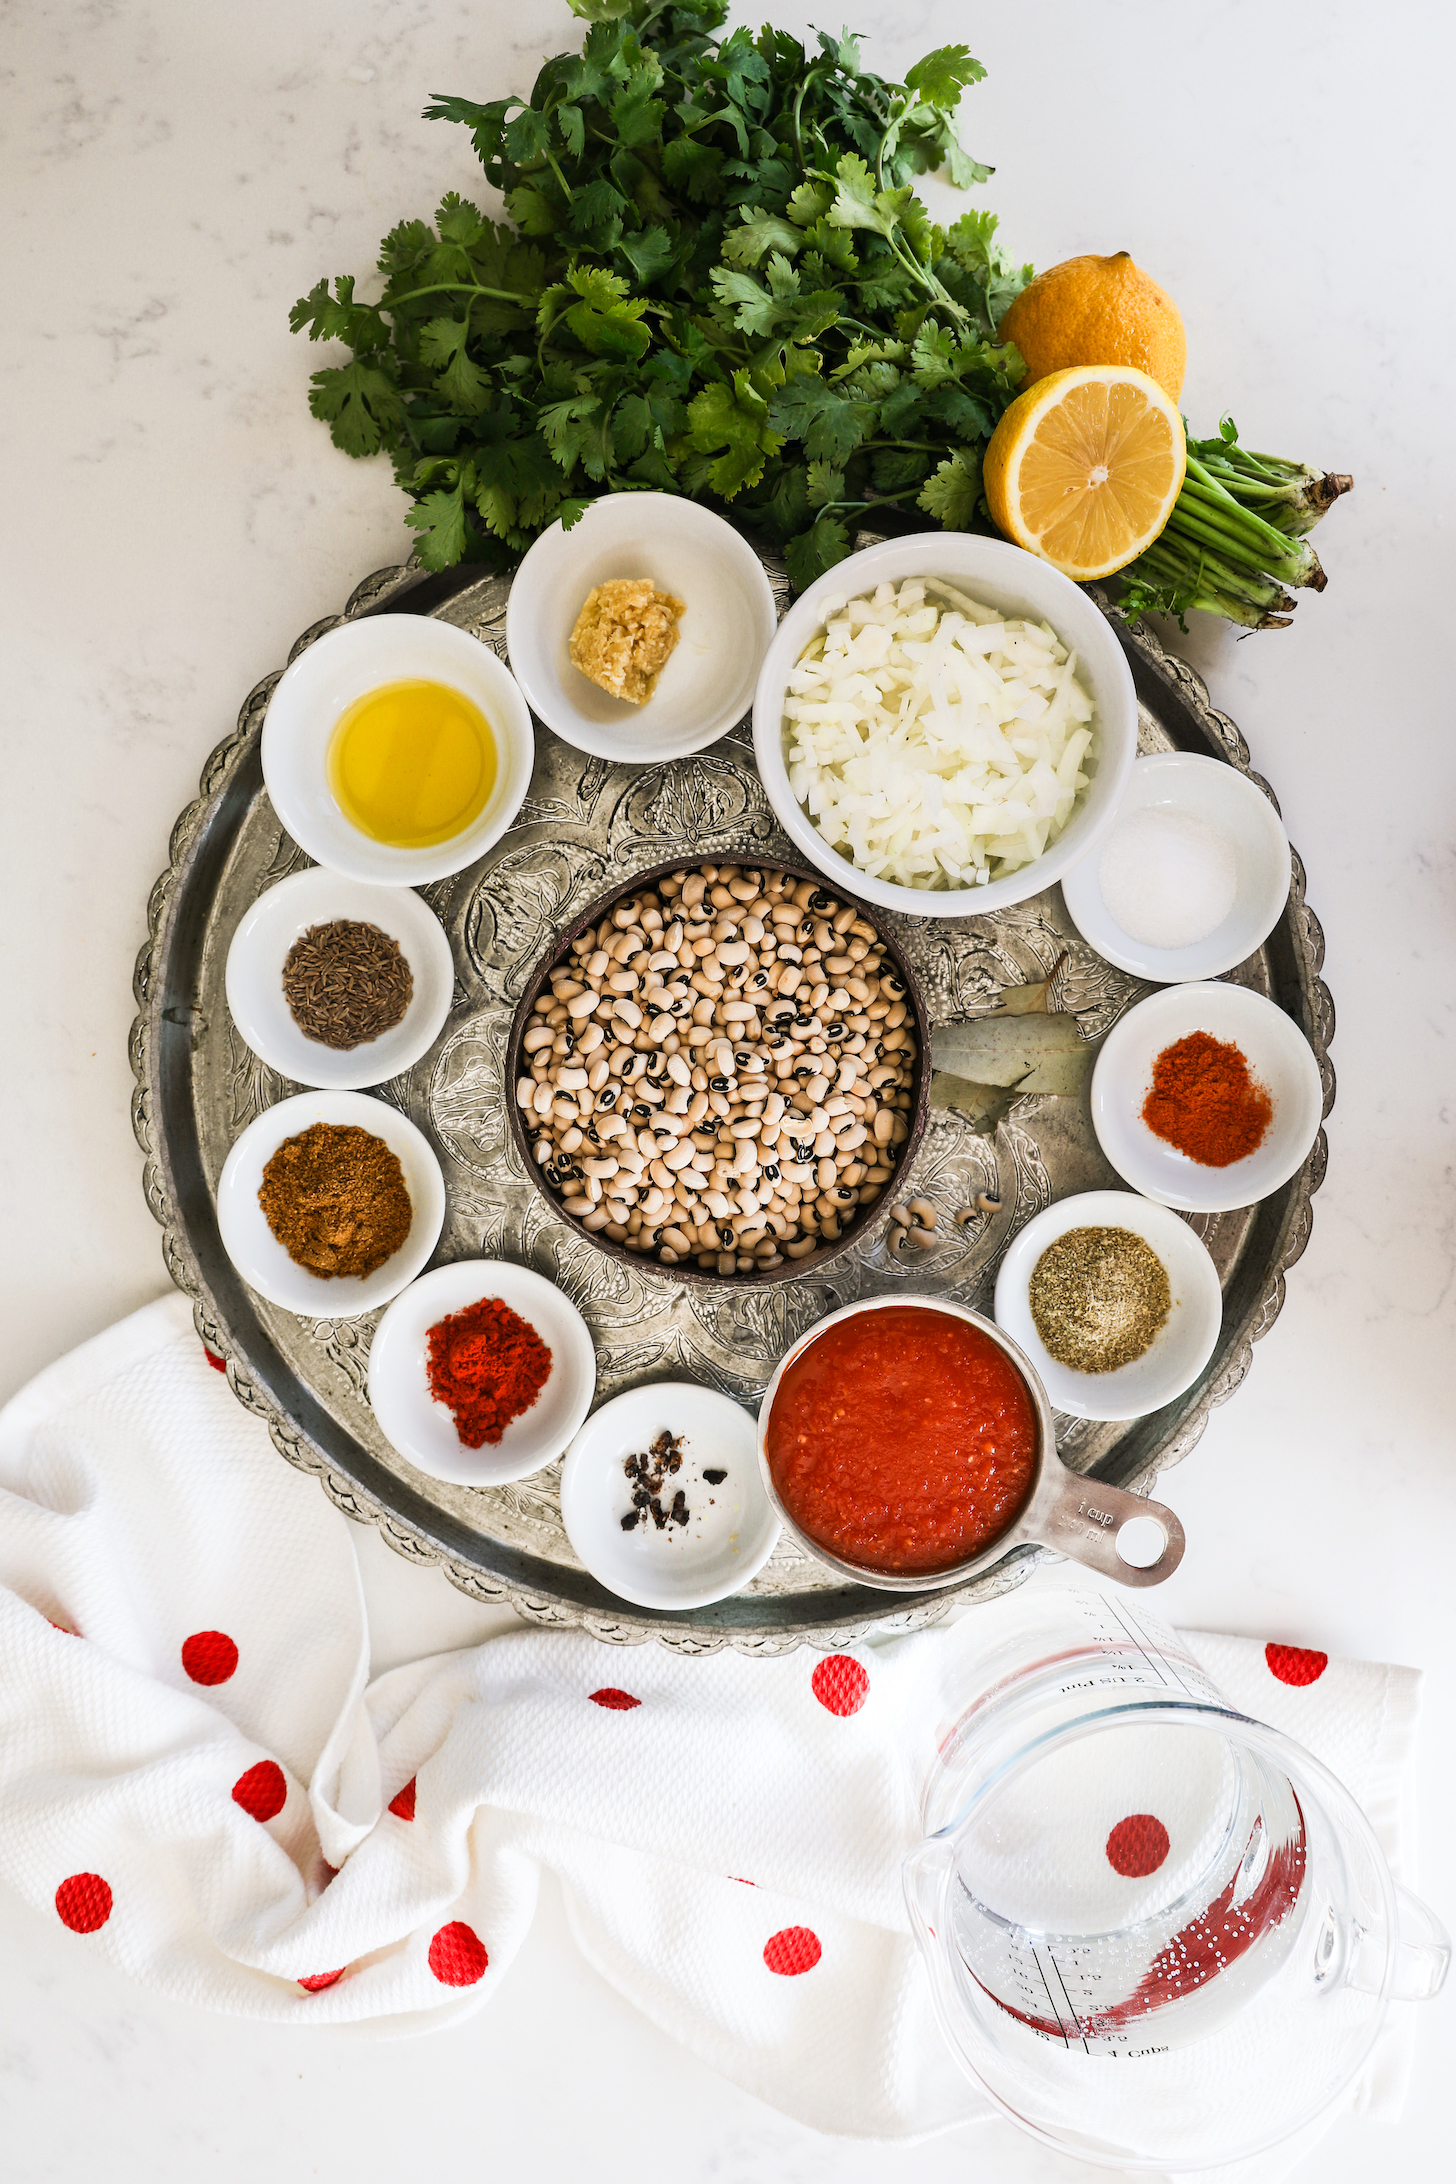 An assortment of food ingredients artfully arranged in a circular pattern on a silver tray.